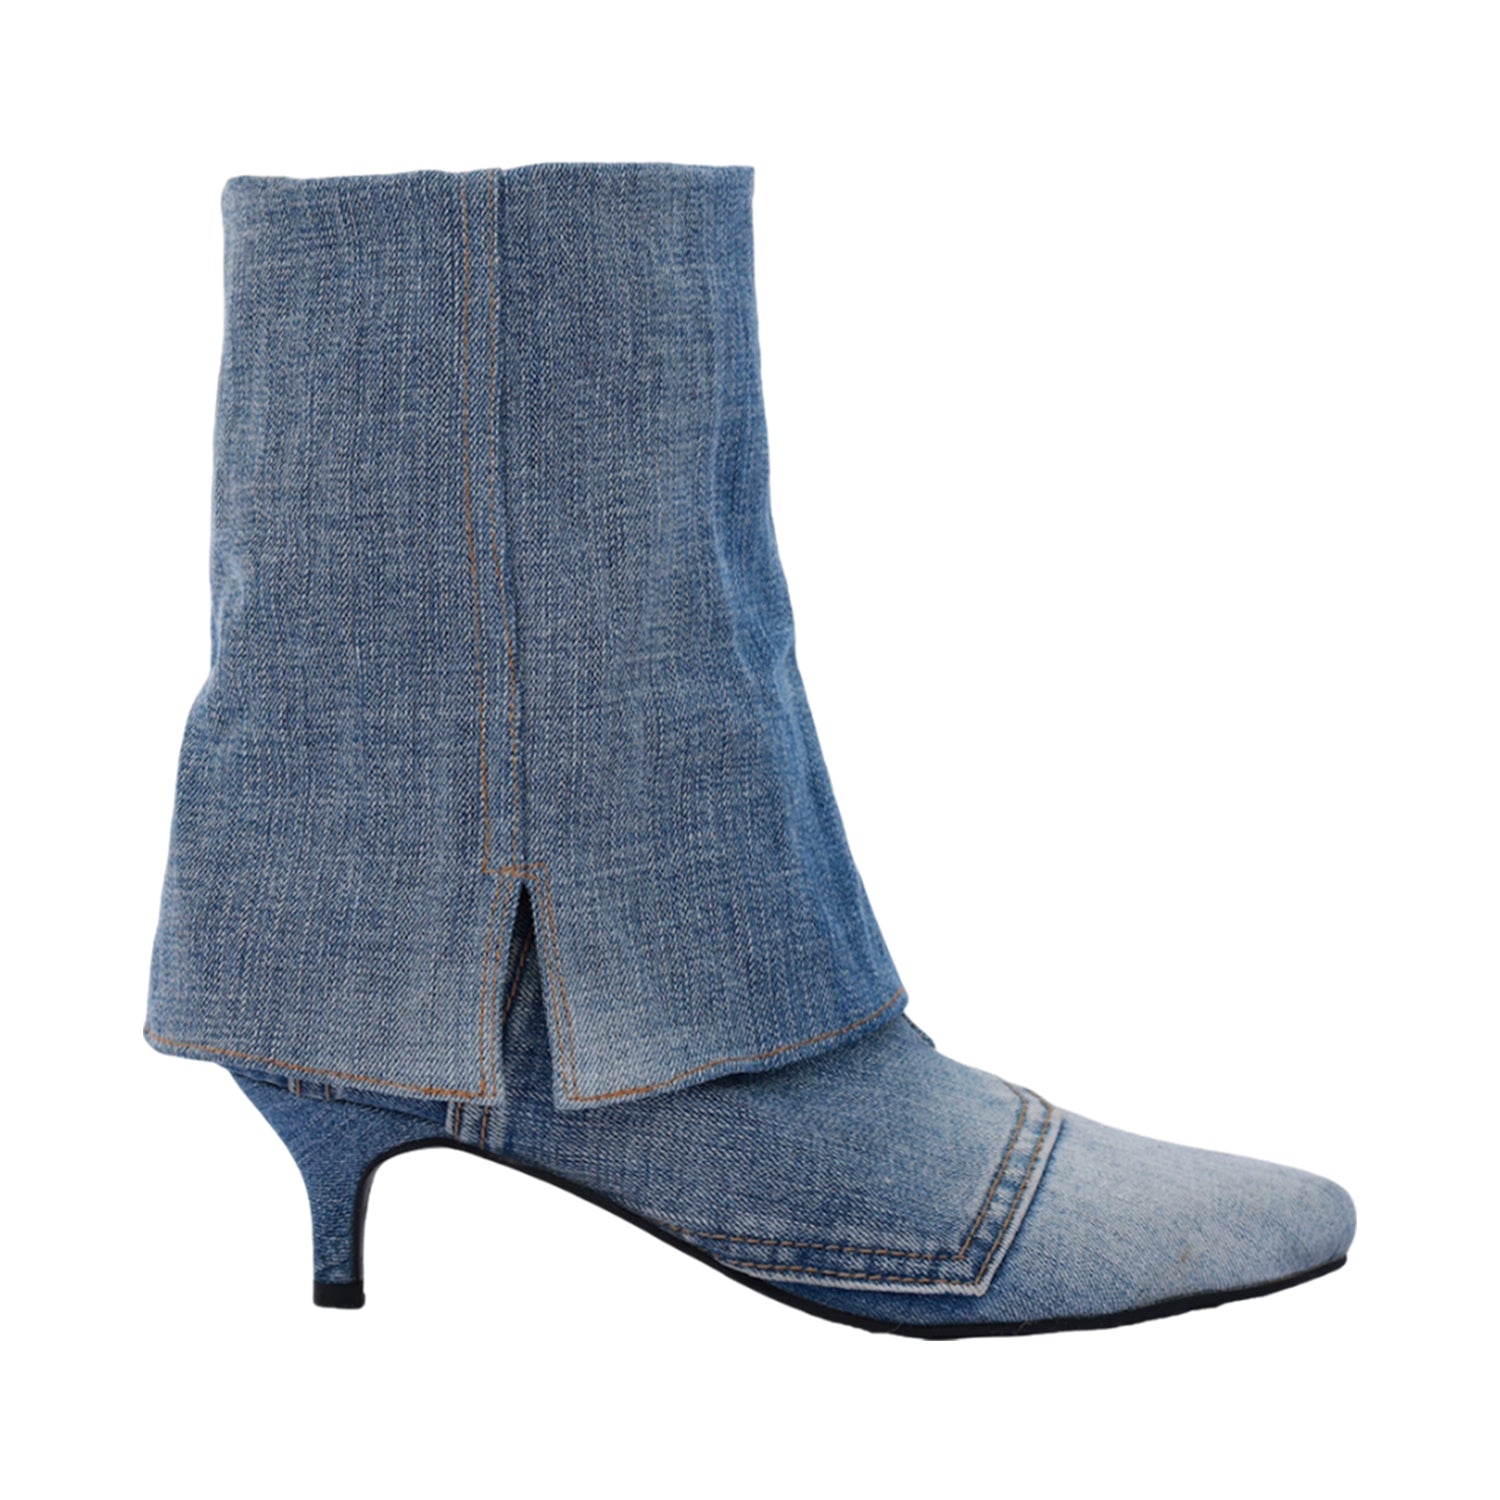 Denim Ankle Boots